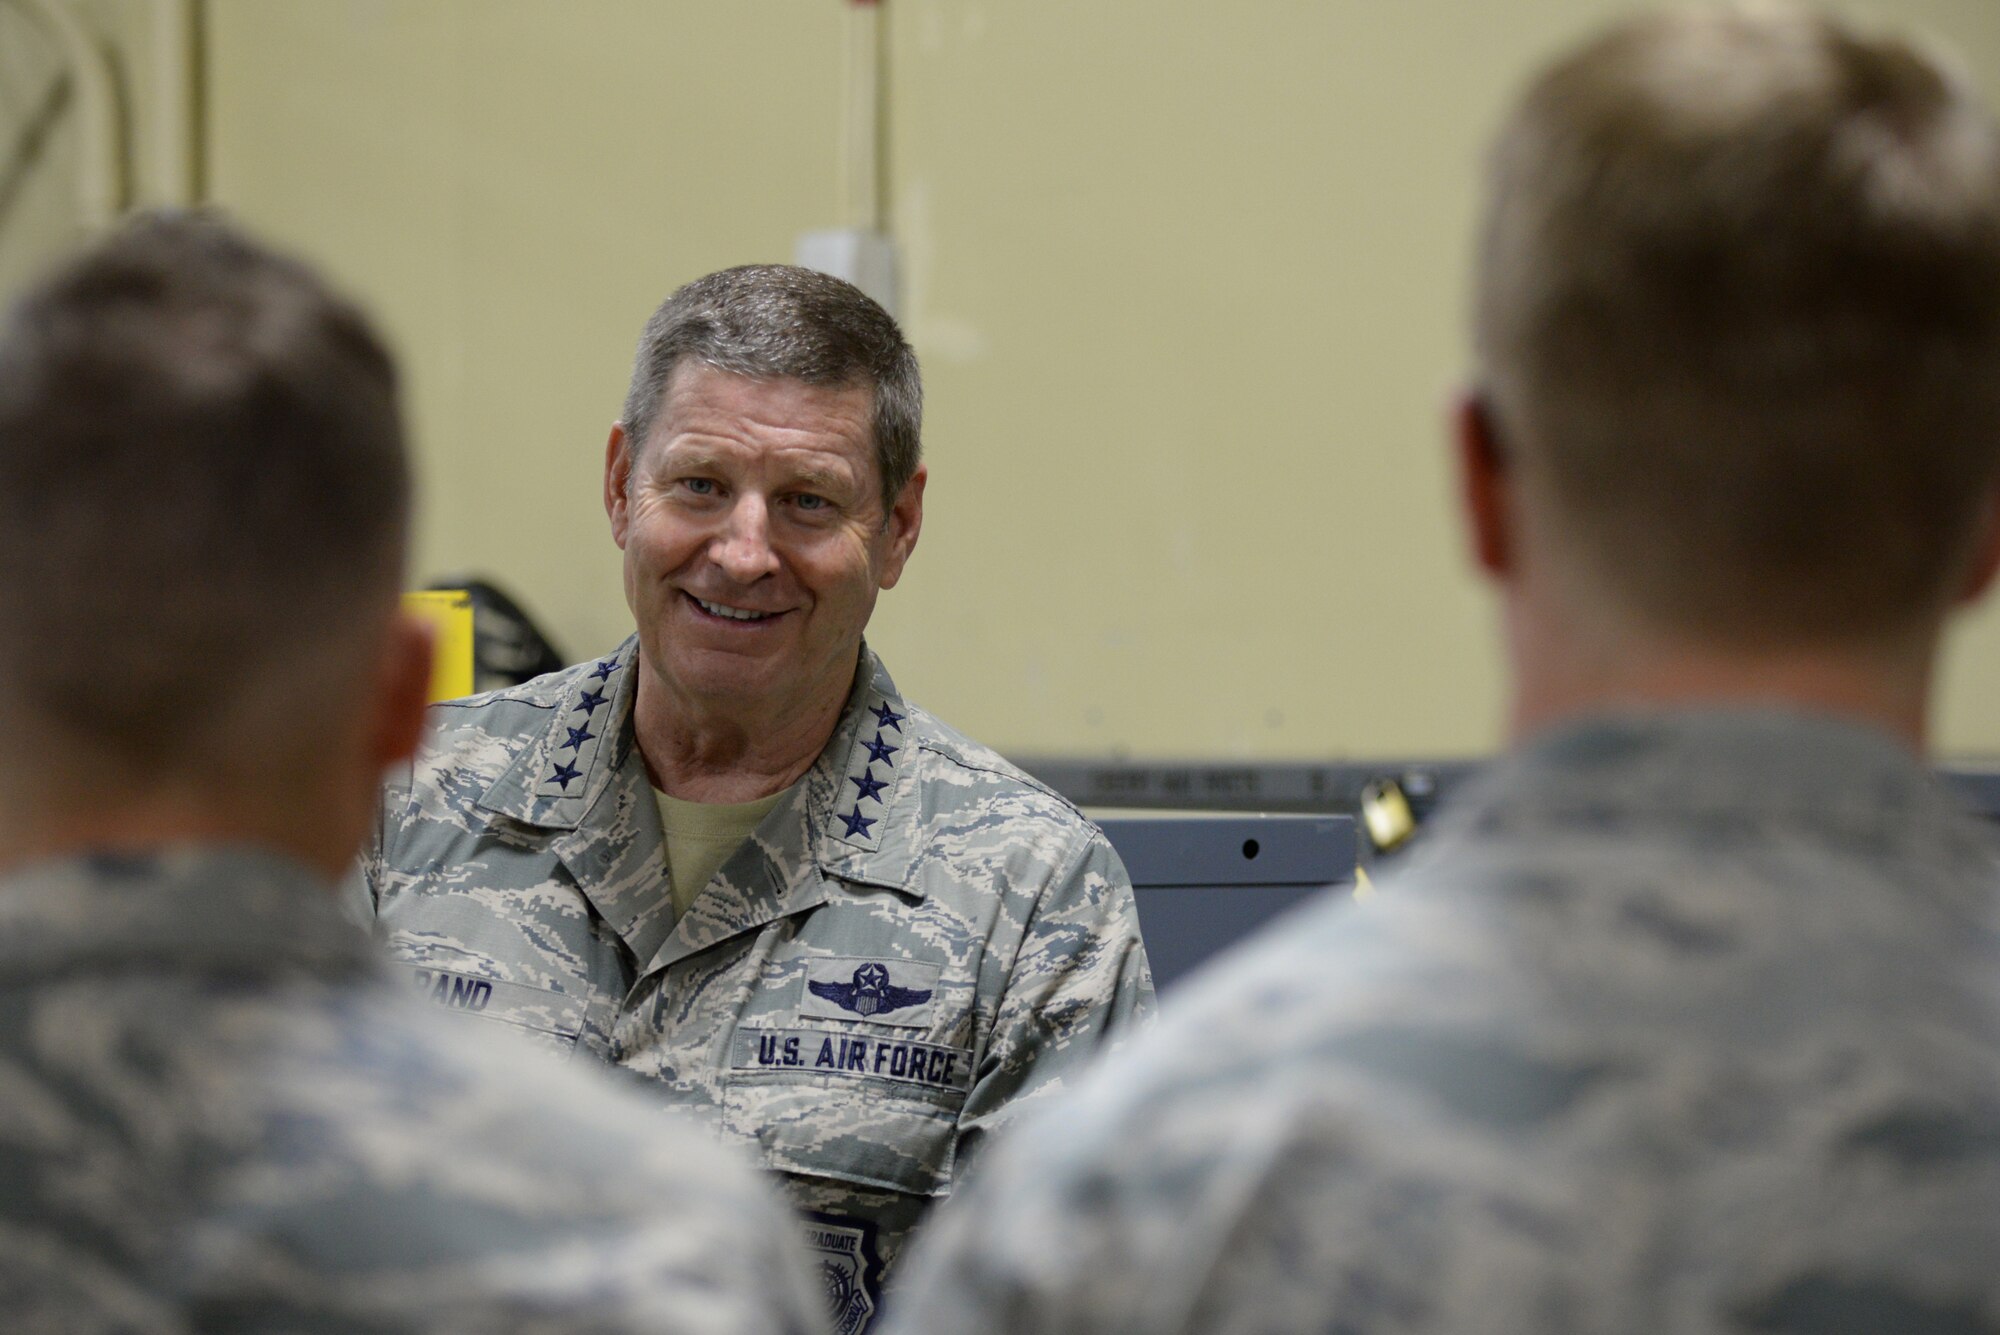 Gen. Robin Rand, AFGSC commander, speaks with maintenance Airmen Nov. 1, 2016, at Andersen Air Force Base, Guam.  More than 300 Airmen from the Ellsworth AFB, S.D., are deployed to Andersen AFB, to support B-1 Lancers as part of the U.S. Pacific Command’s continuous bomber presence mission. (U.S. Air Force Photo by Airman 1st Class Jacob Skovo)